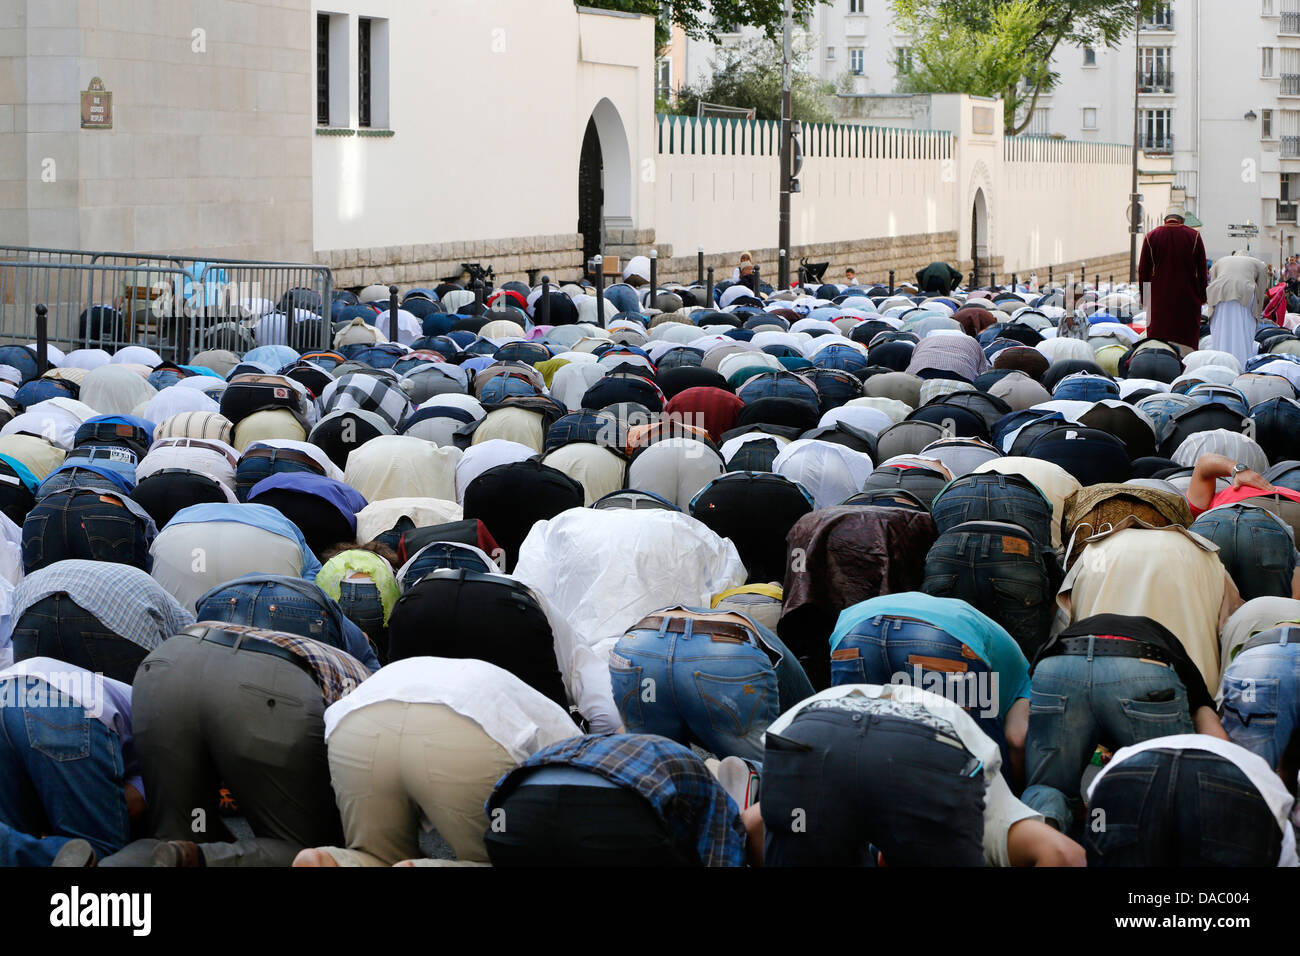 Muslims praying outside the Paris Great Mosque on Eid al-Fitr festival, Paris, France, Europe Stock Photo